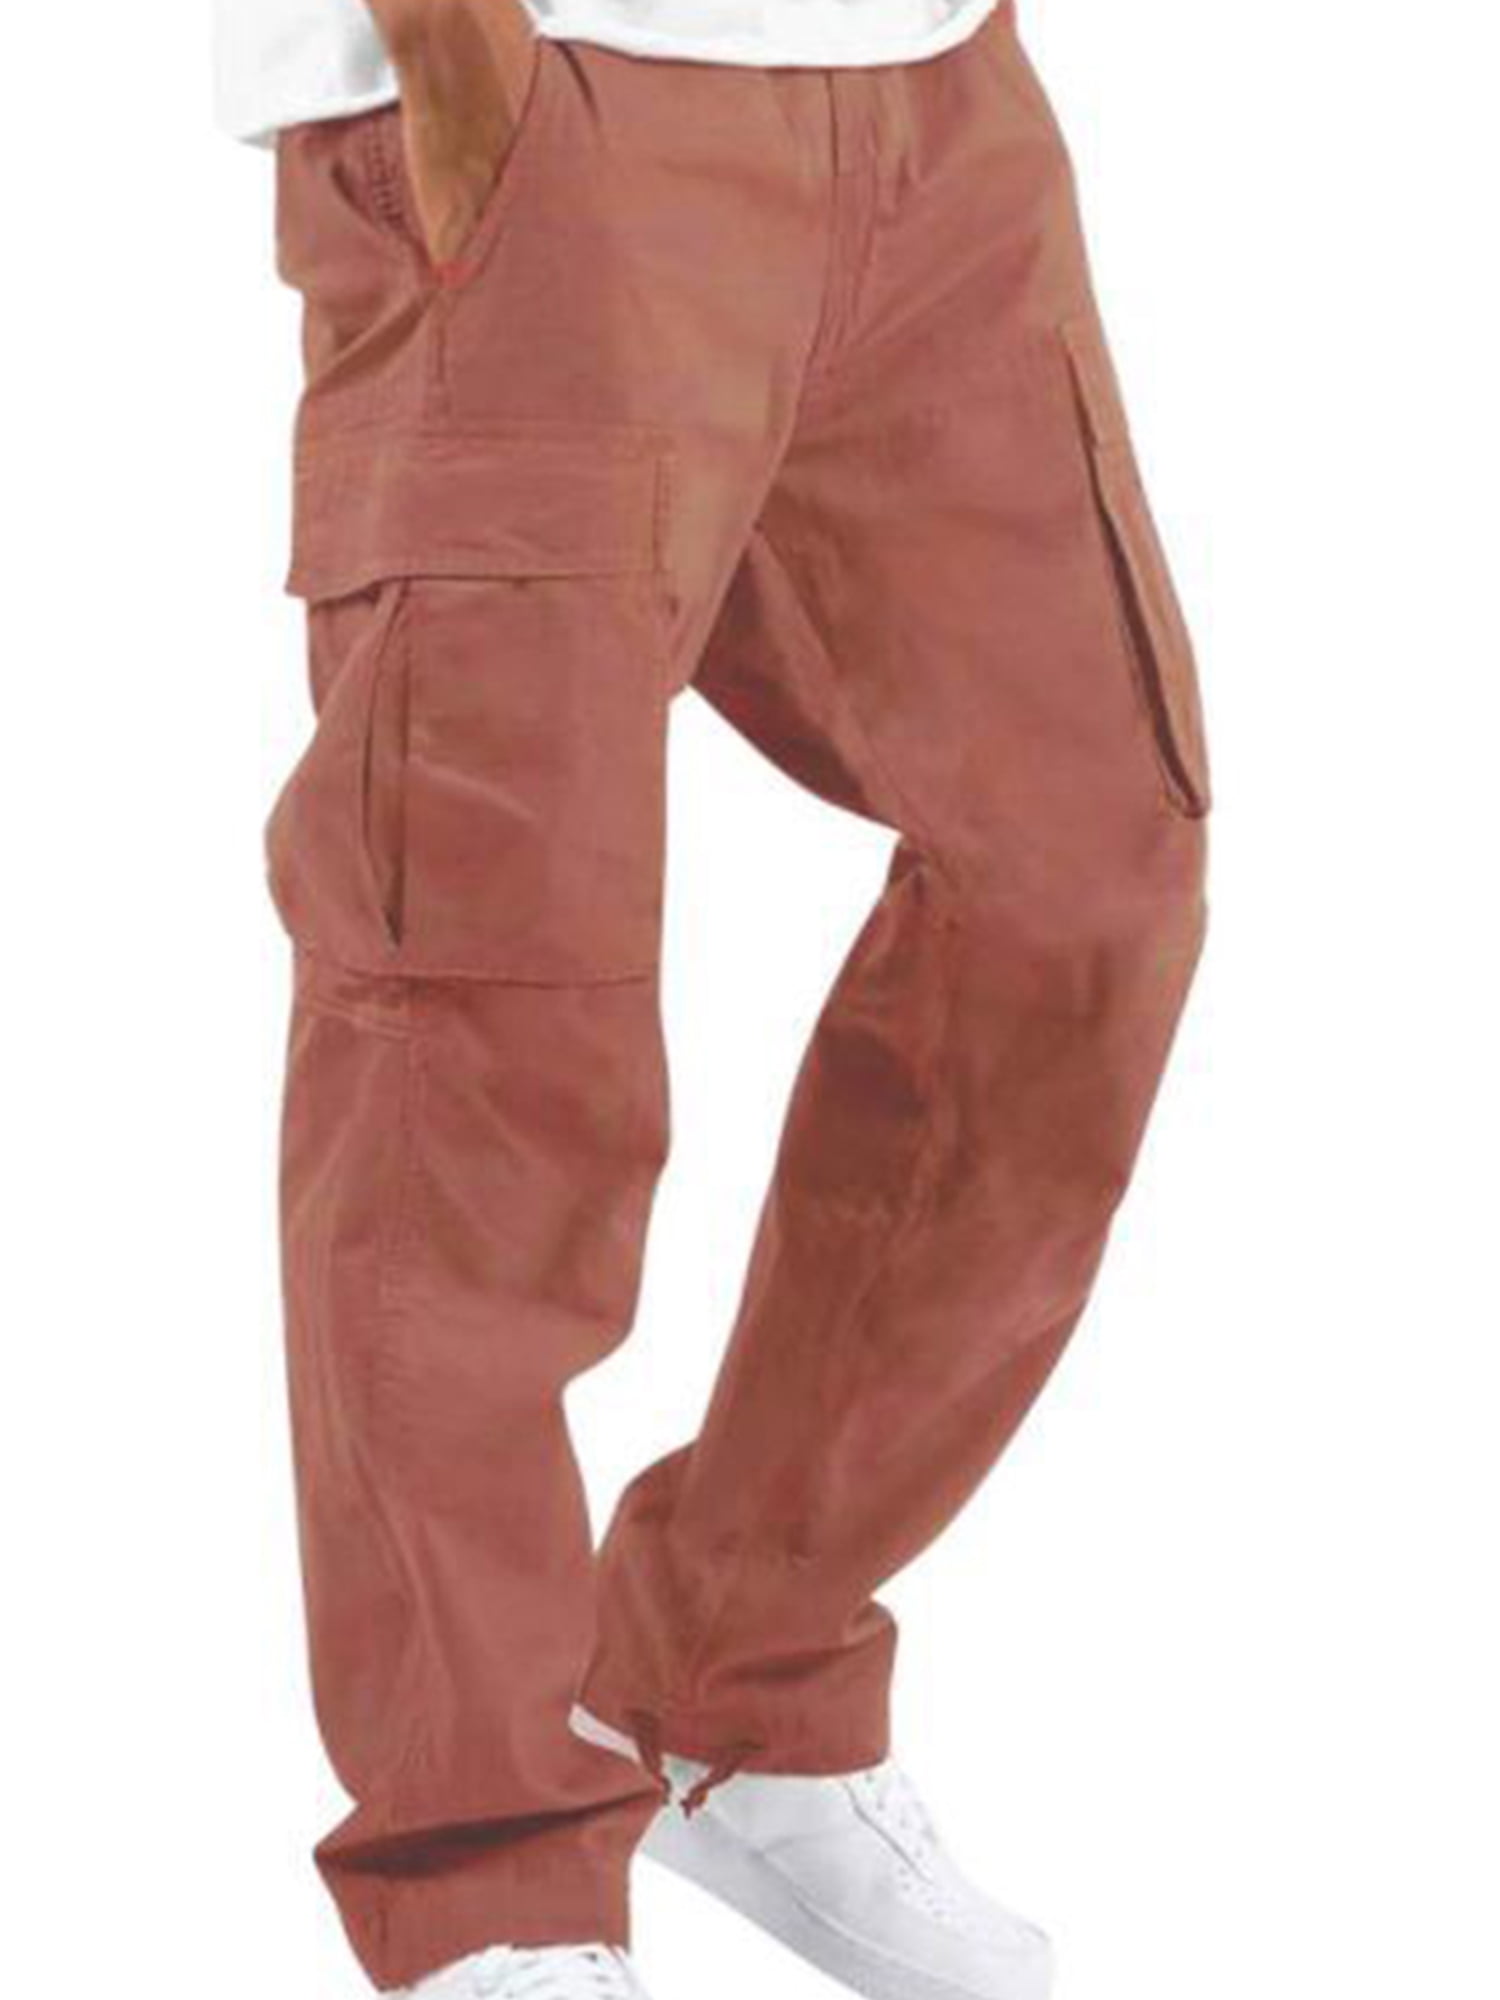 4xl Mens Trousers  Buy 4xl Mens Trousers Online at Best Prices In India   Flipkartcom